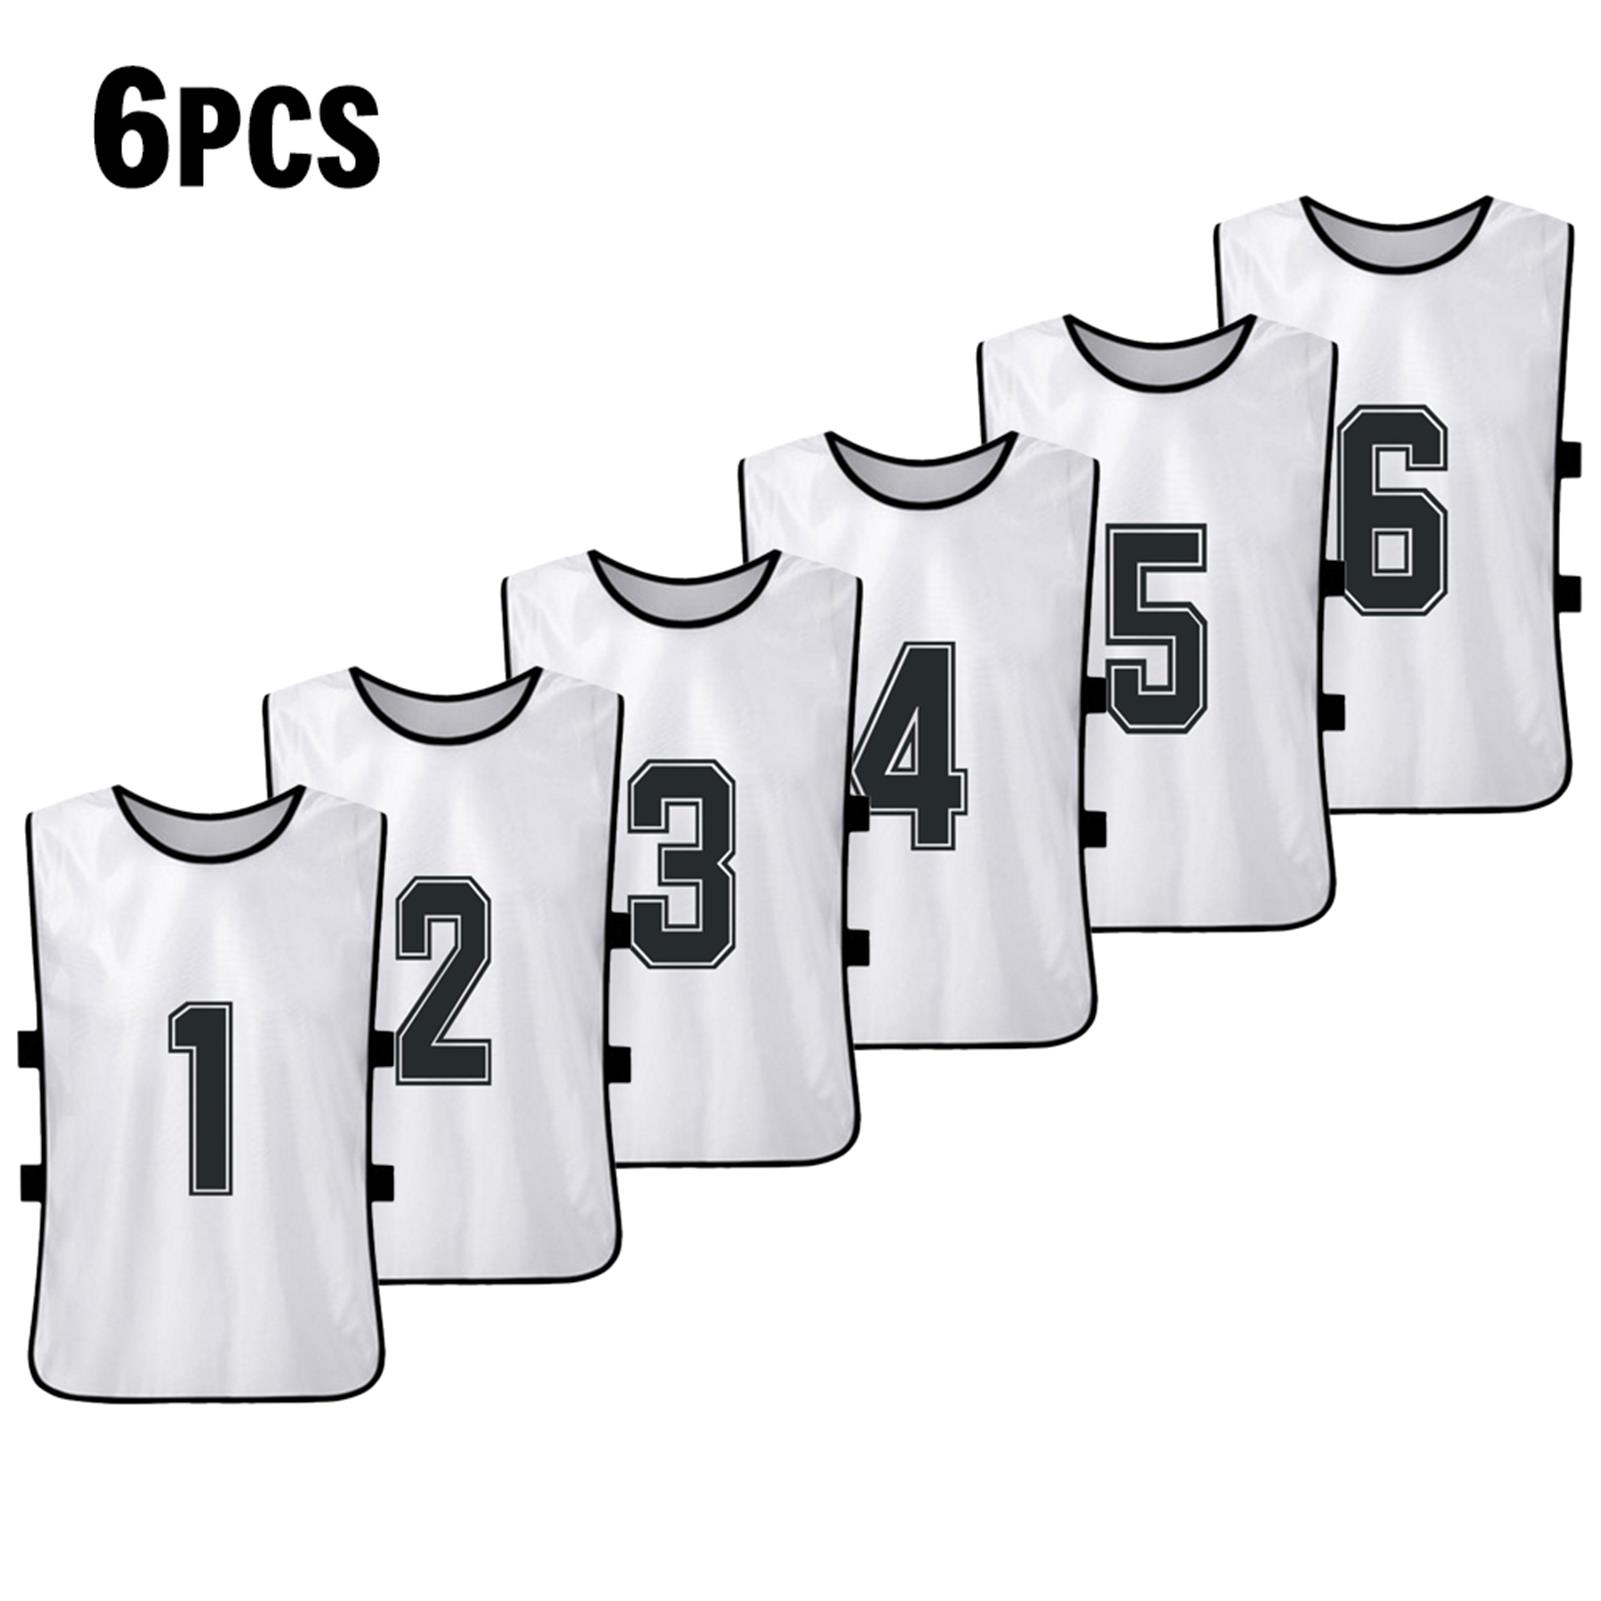 moobody PCS Adults Soccer Pinnies Quick Drying Football Team Jerseys Youth  Sports Scrimmage Soccer Team Training Numbered Bibs Practice Sports Vest 